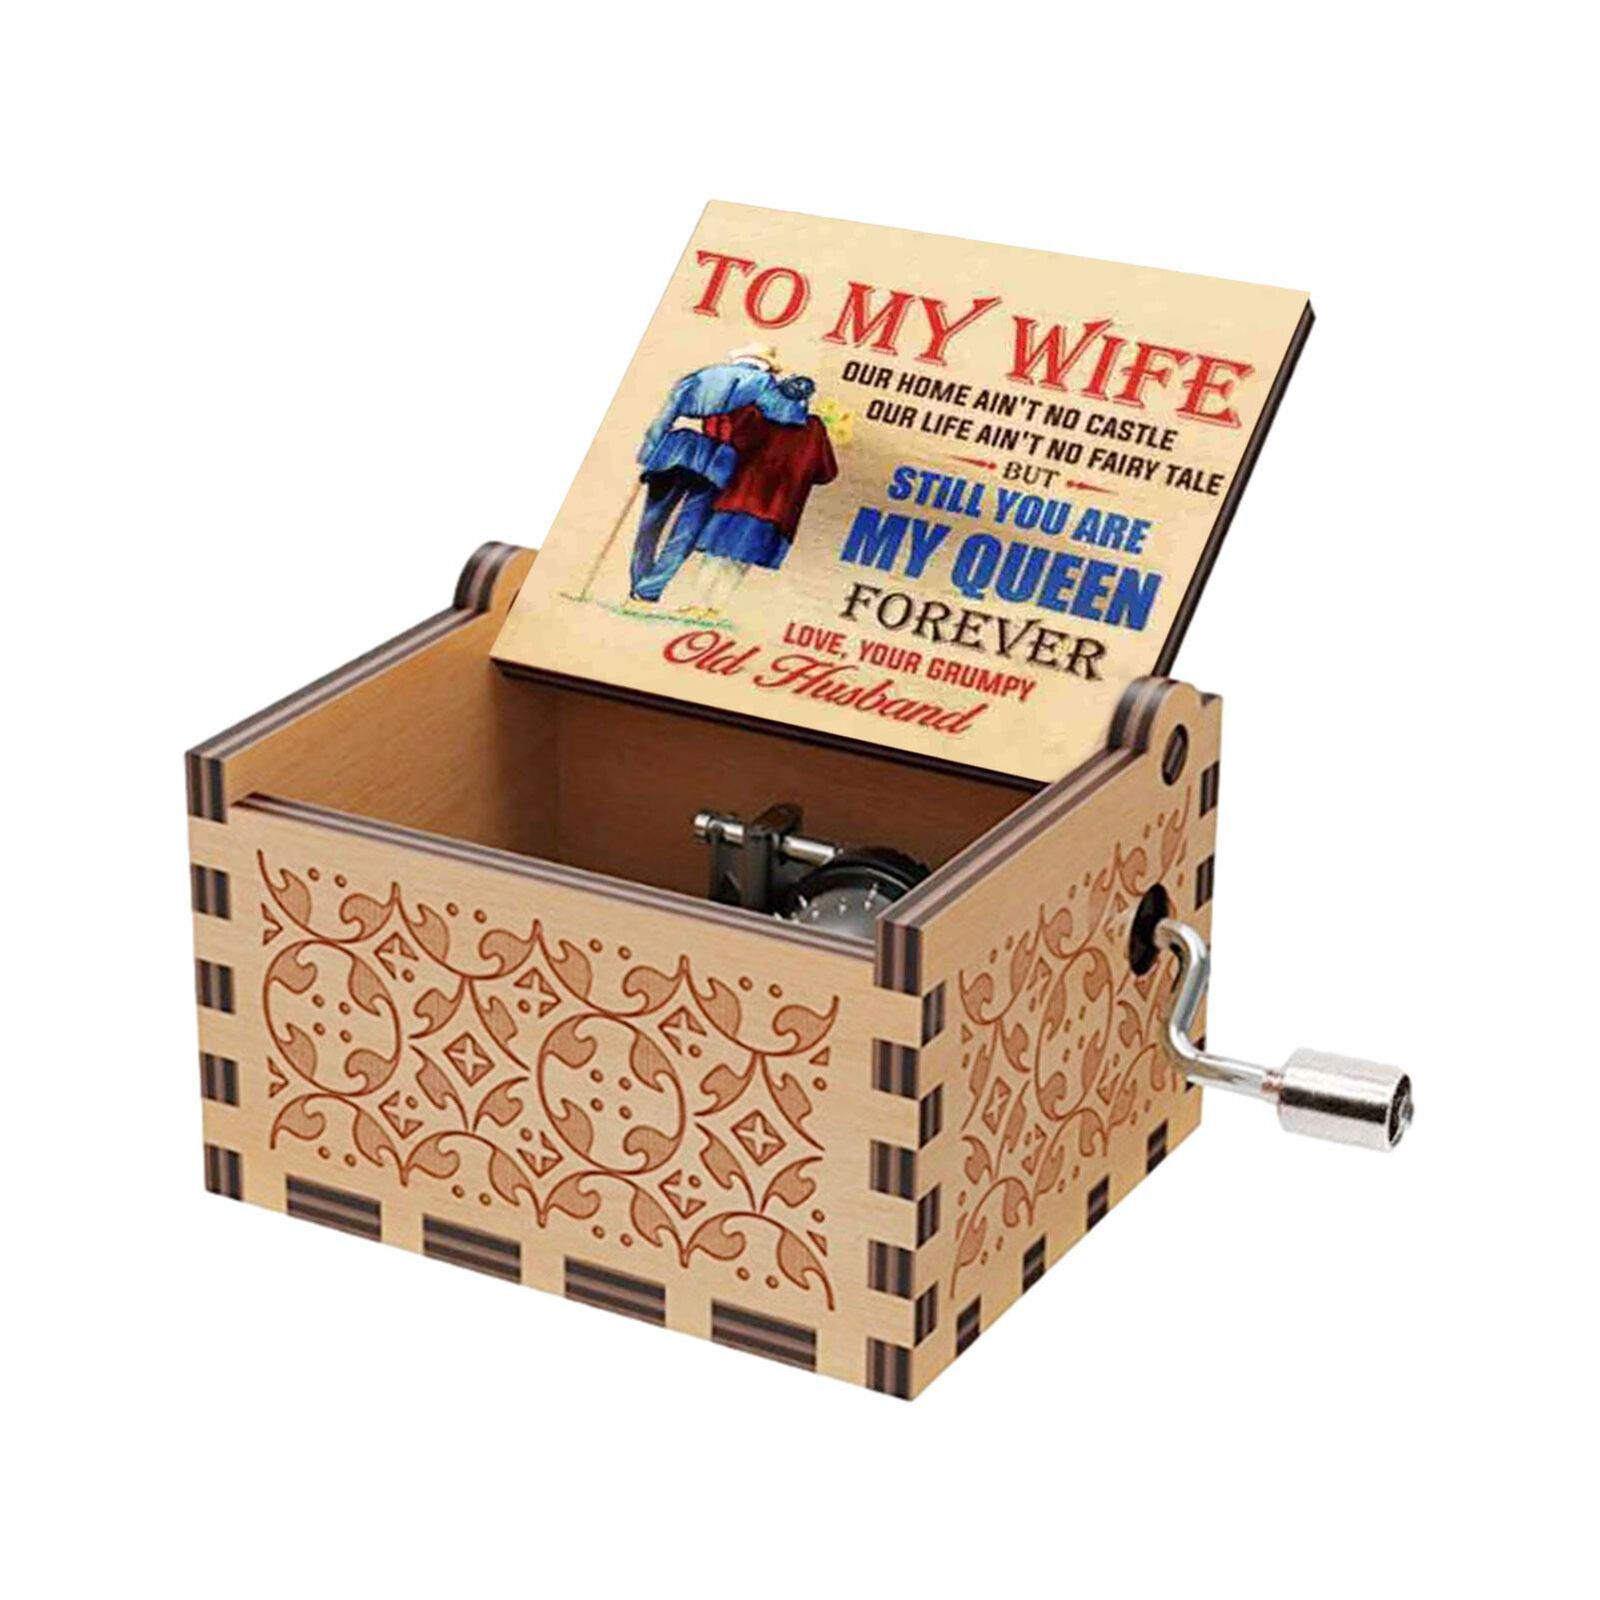 Retro Wooden Music Box To My Wife Hand Crank Engraved Music Box Gift